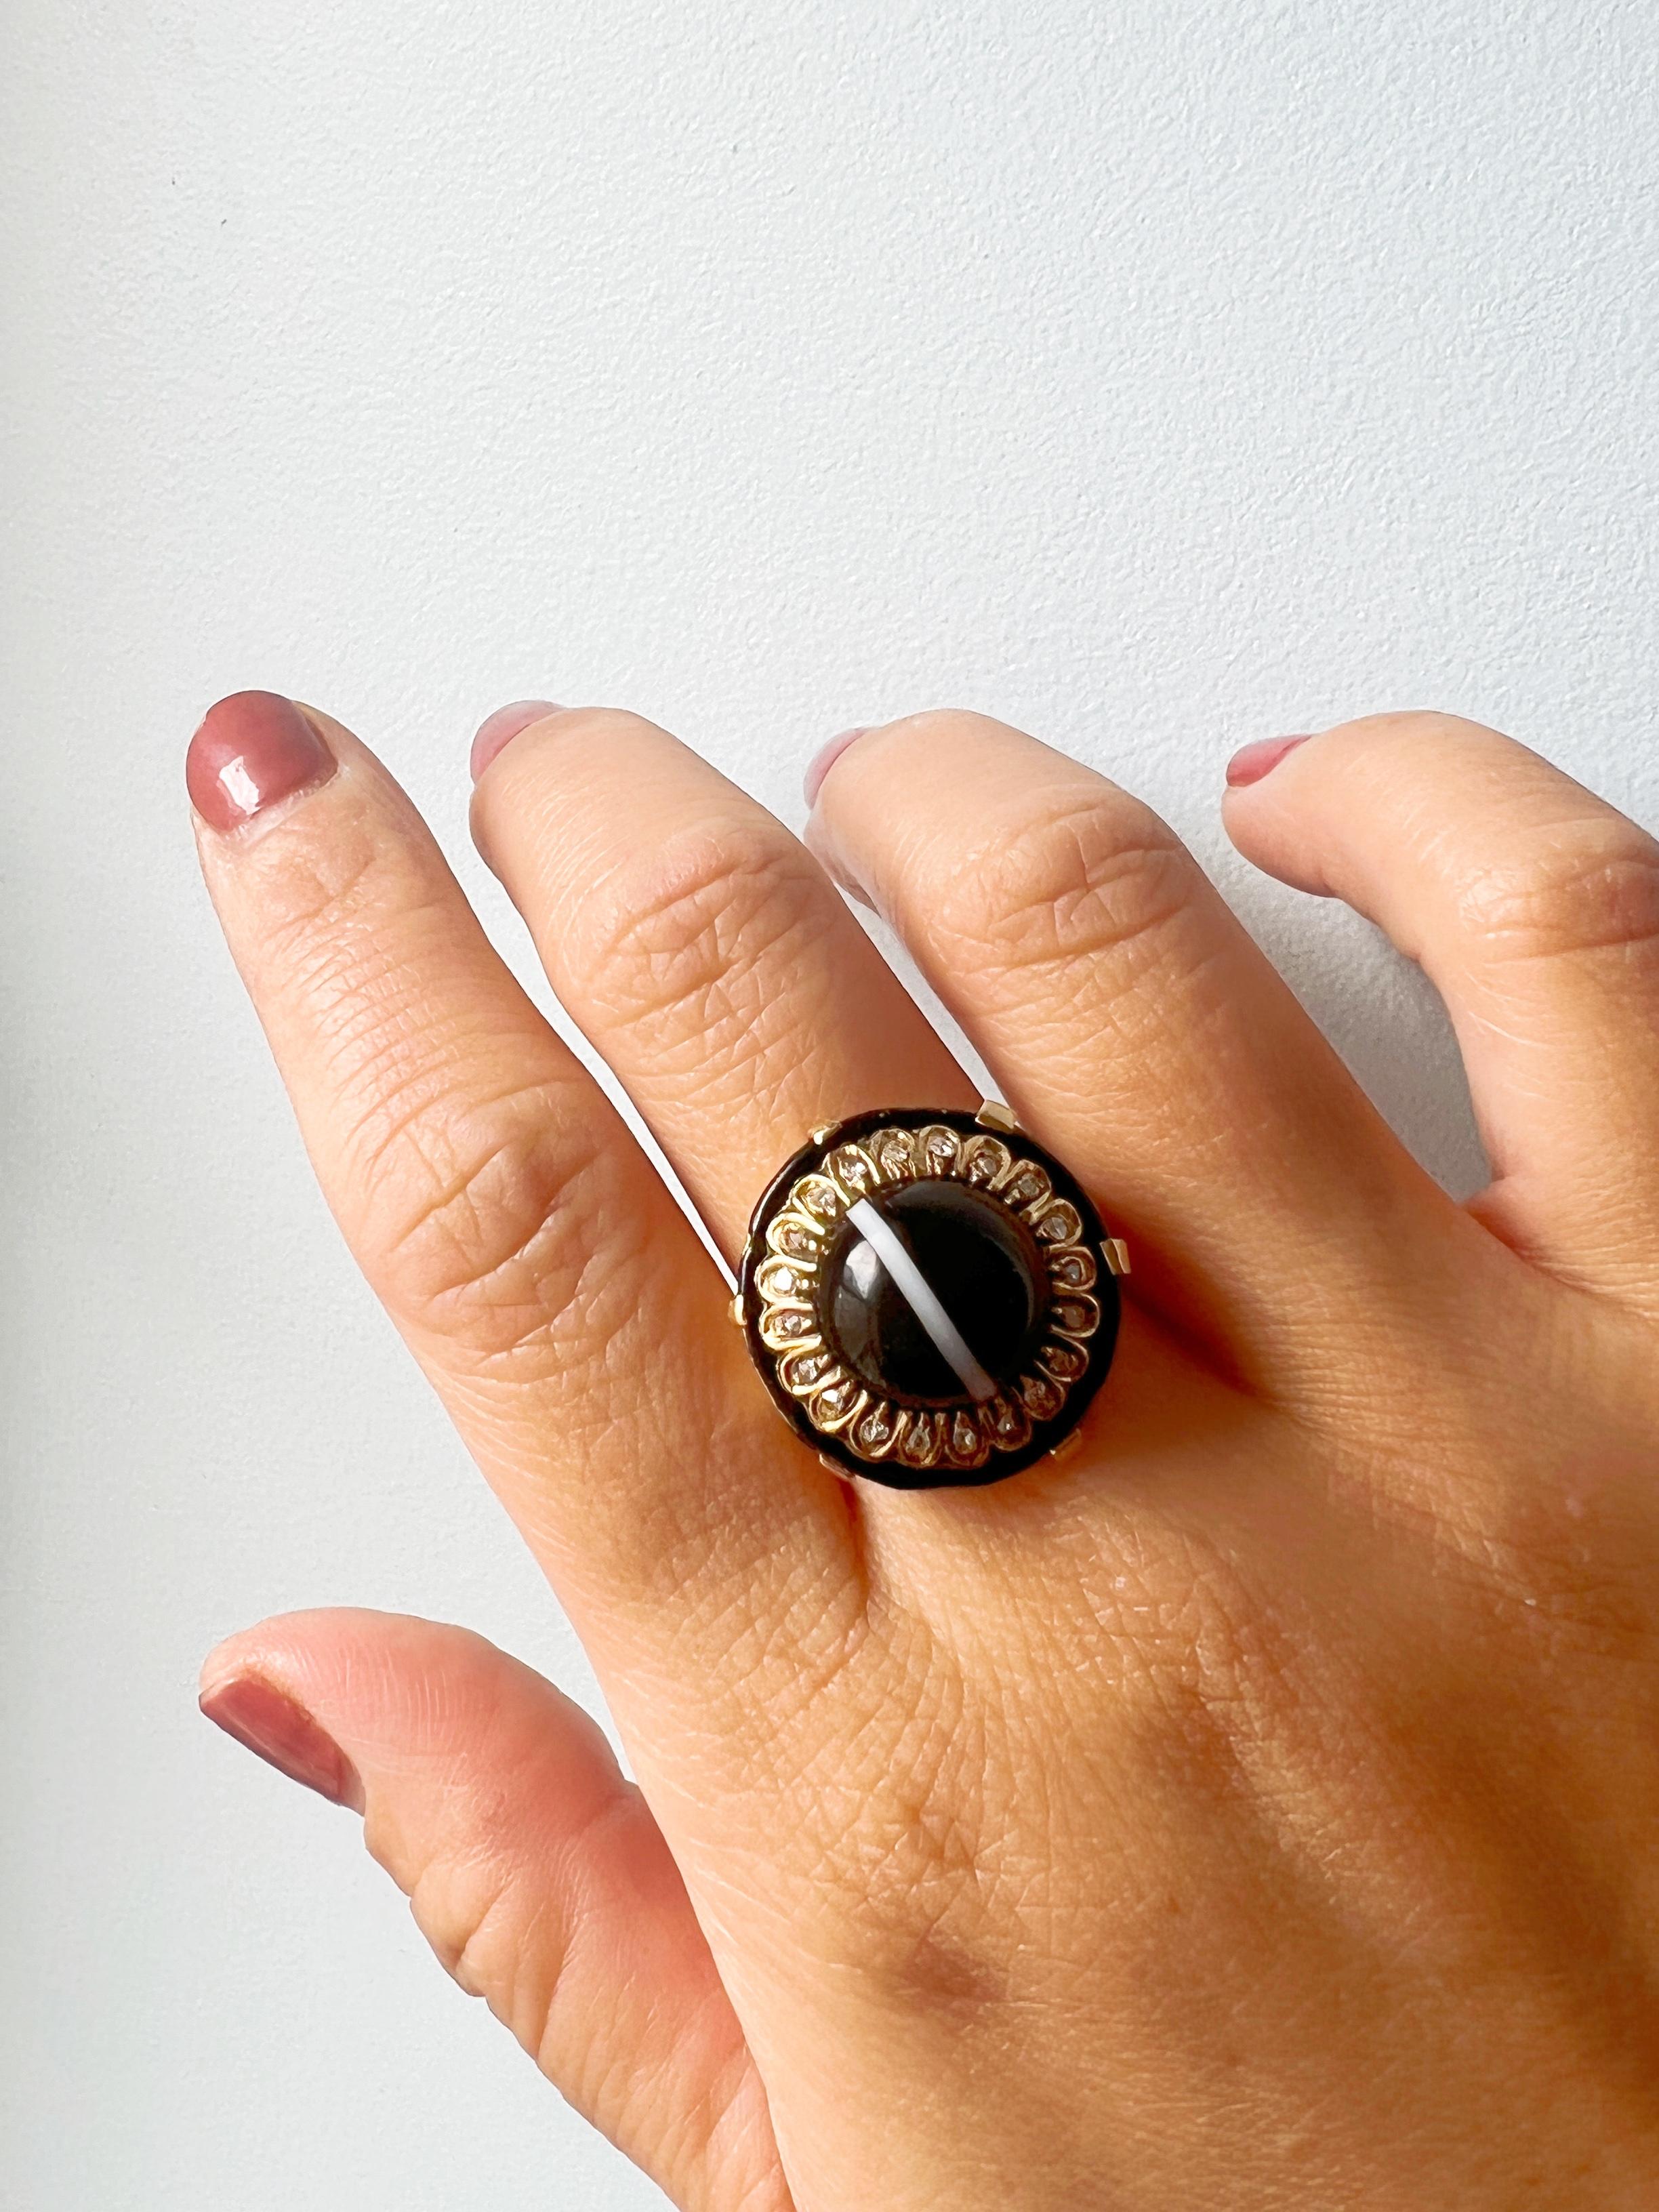 For sale a beautiful Victorian era 18K gold ring, which provides us a mighty monochrome: The black is created from the banded agate with the use of a delicate black enamel on the outer circle, while the white is evoked with the use of the dazzling